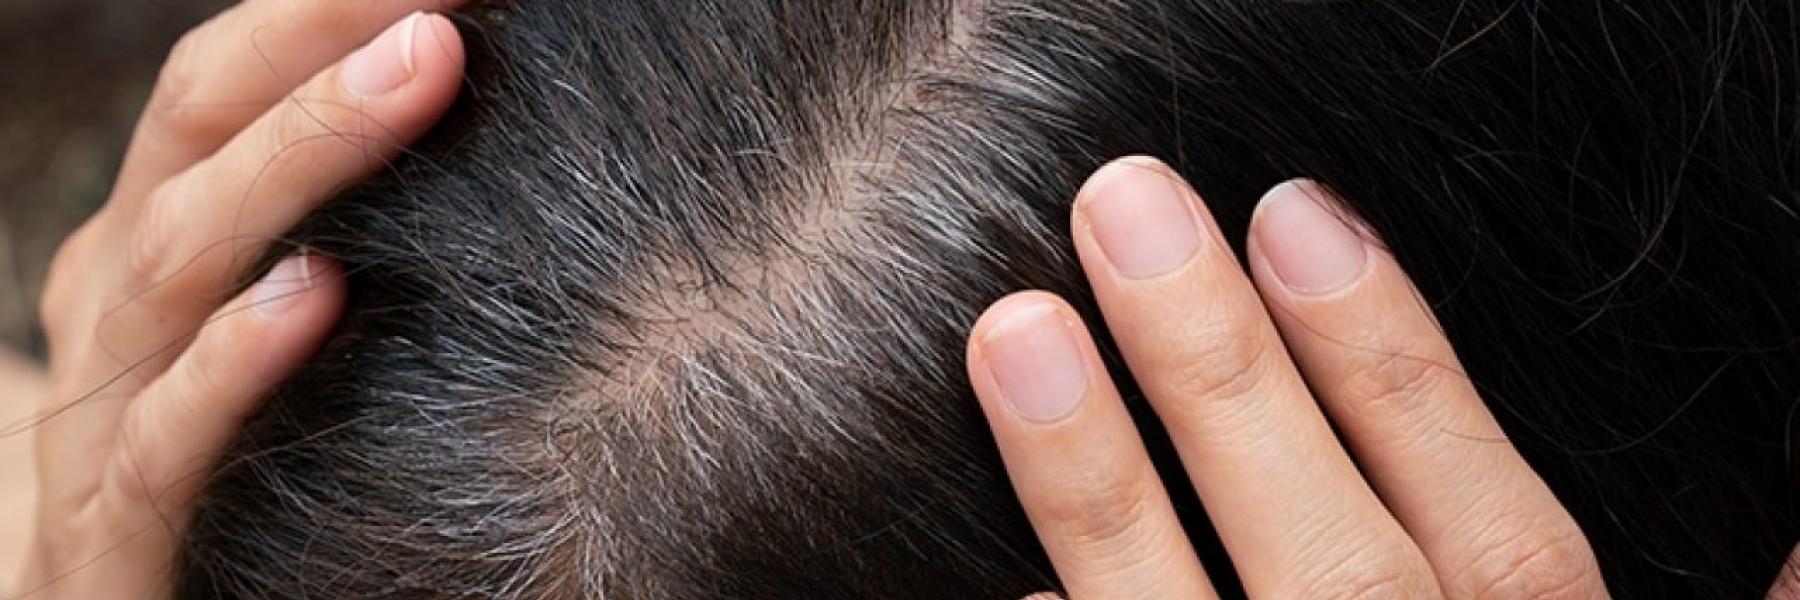 home-remedies-for-premature-graying-of-hair-feat-1280x720.jpg